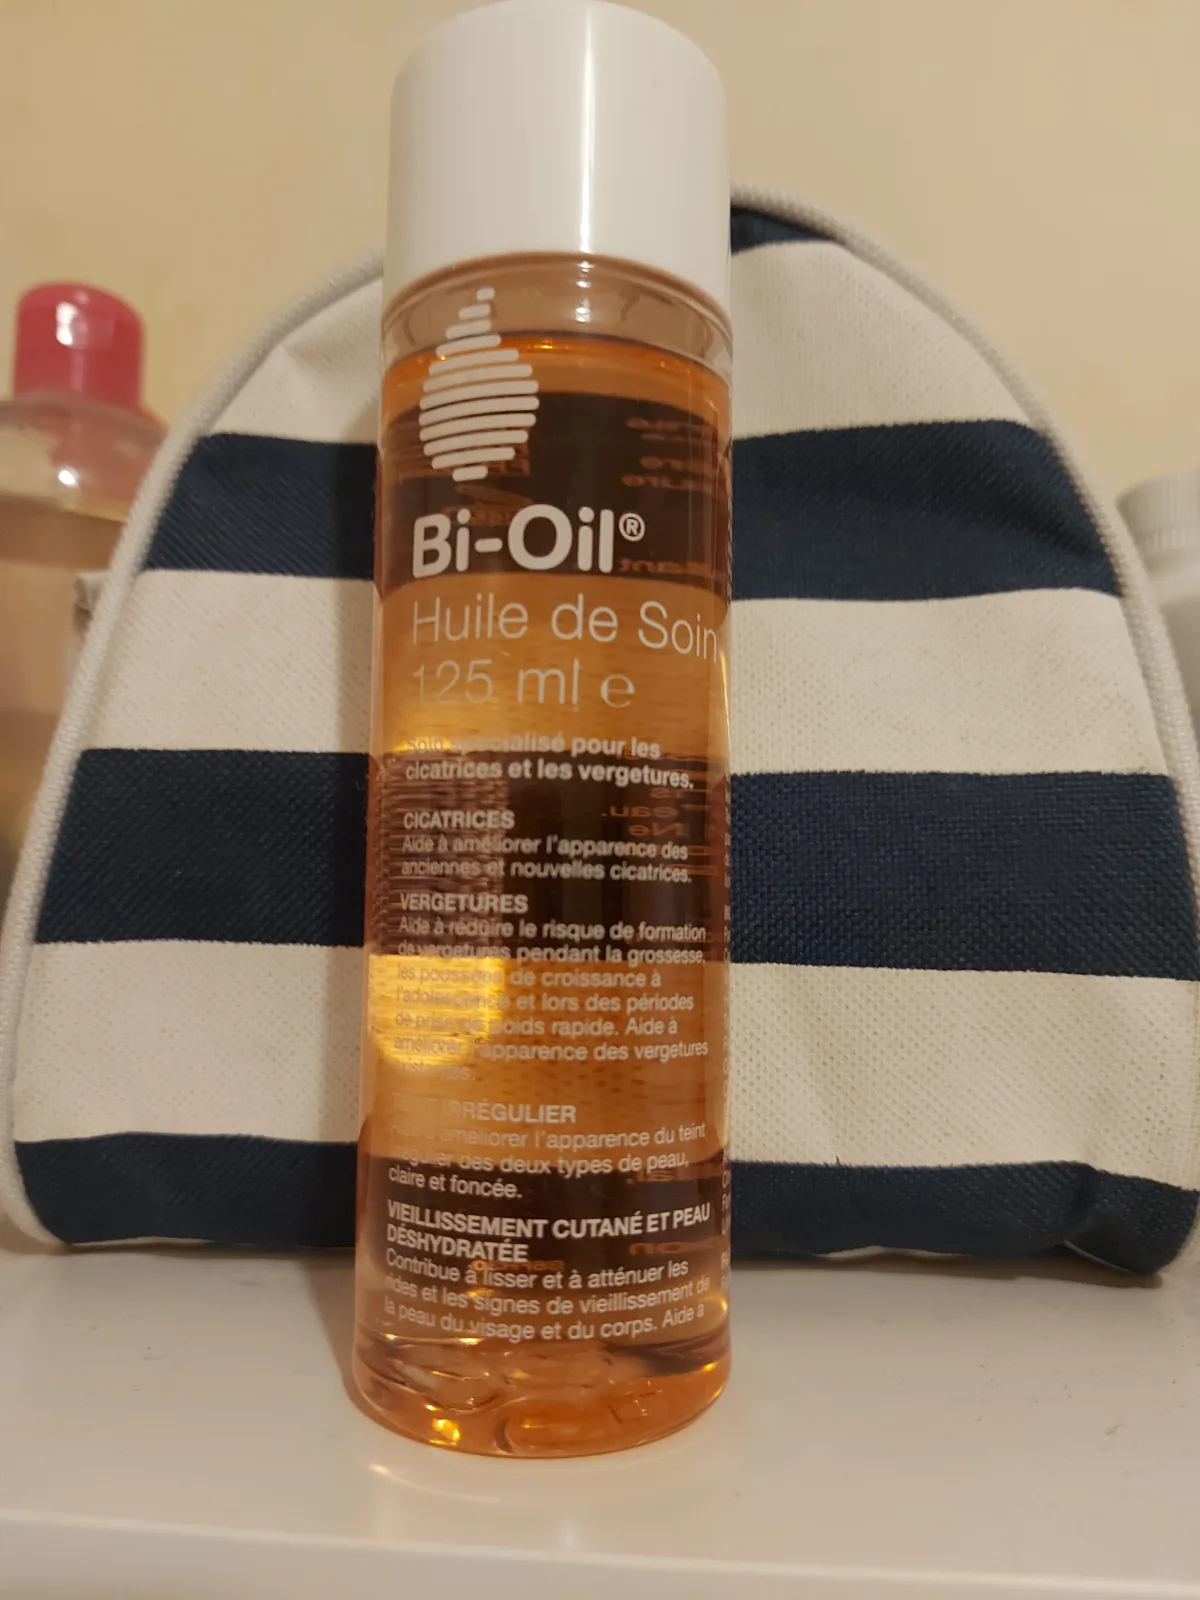 Anti-Stretchmark Olie PurCellin Bio-oil - review image